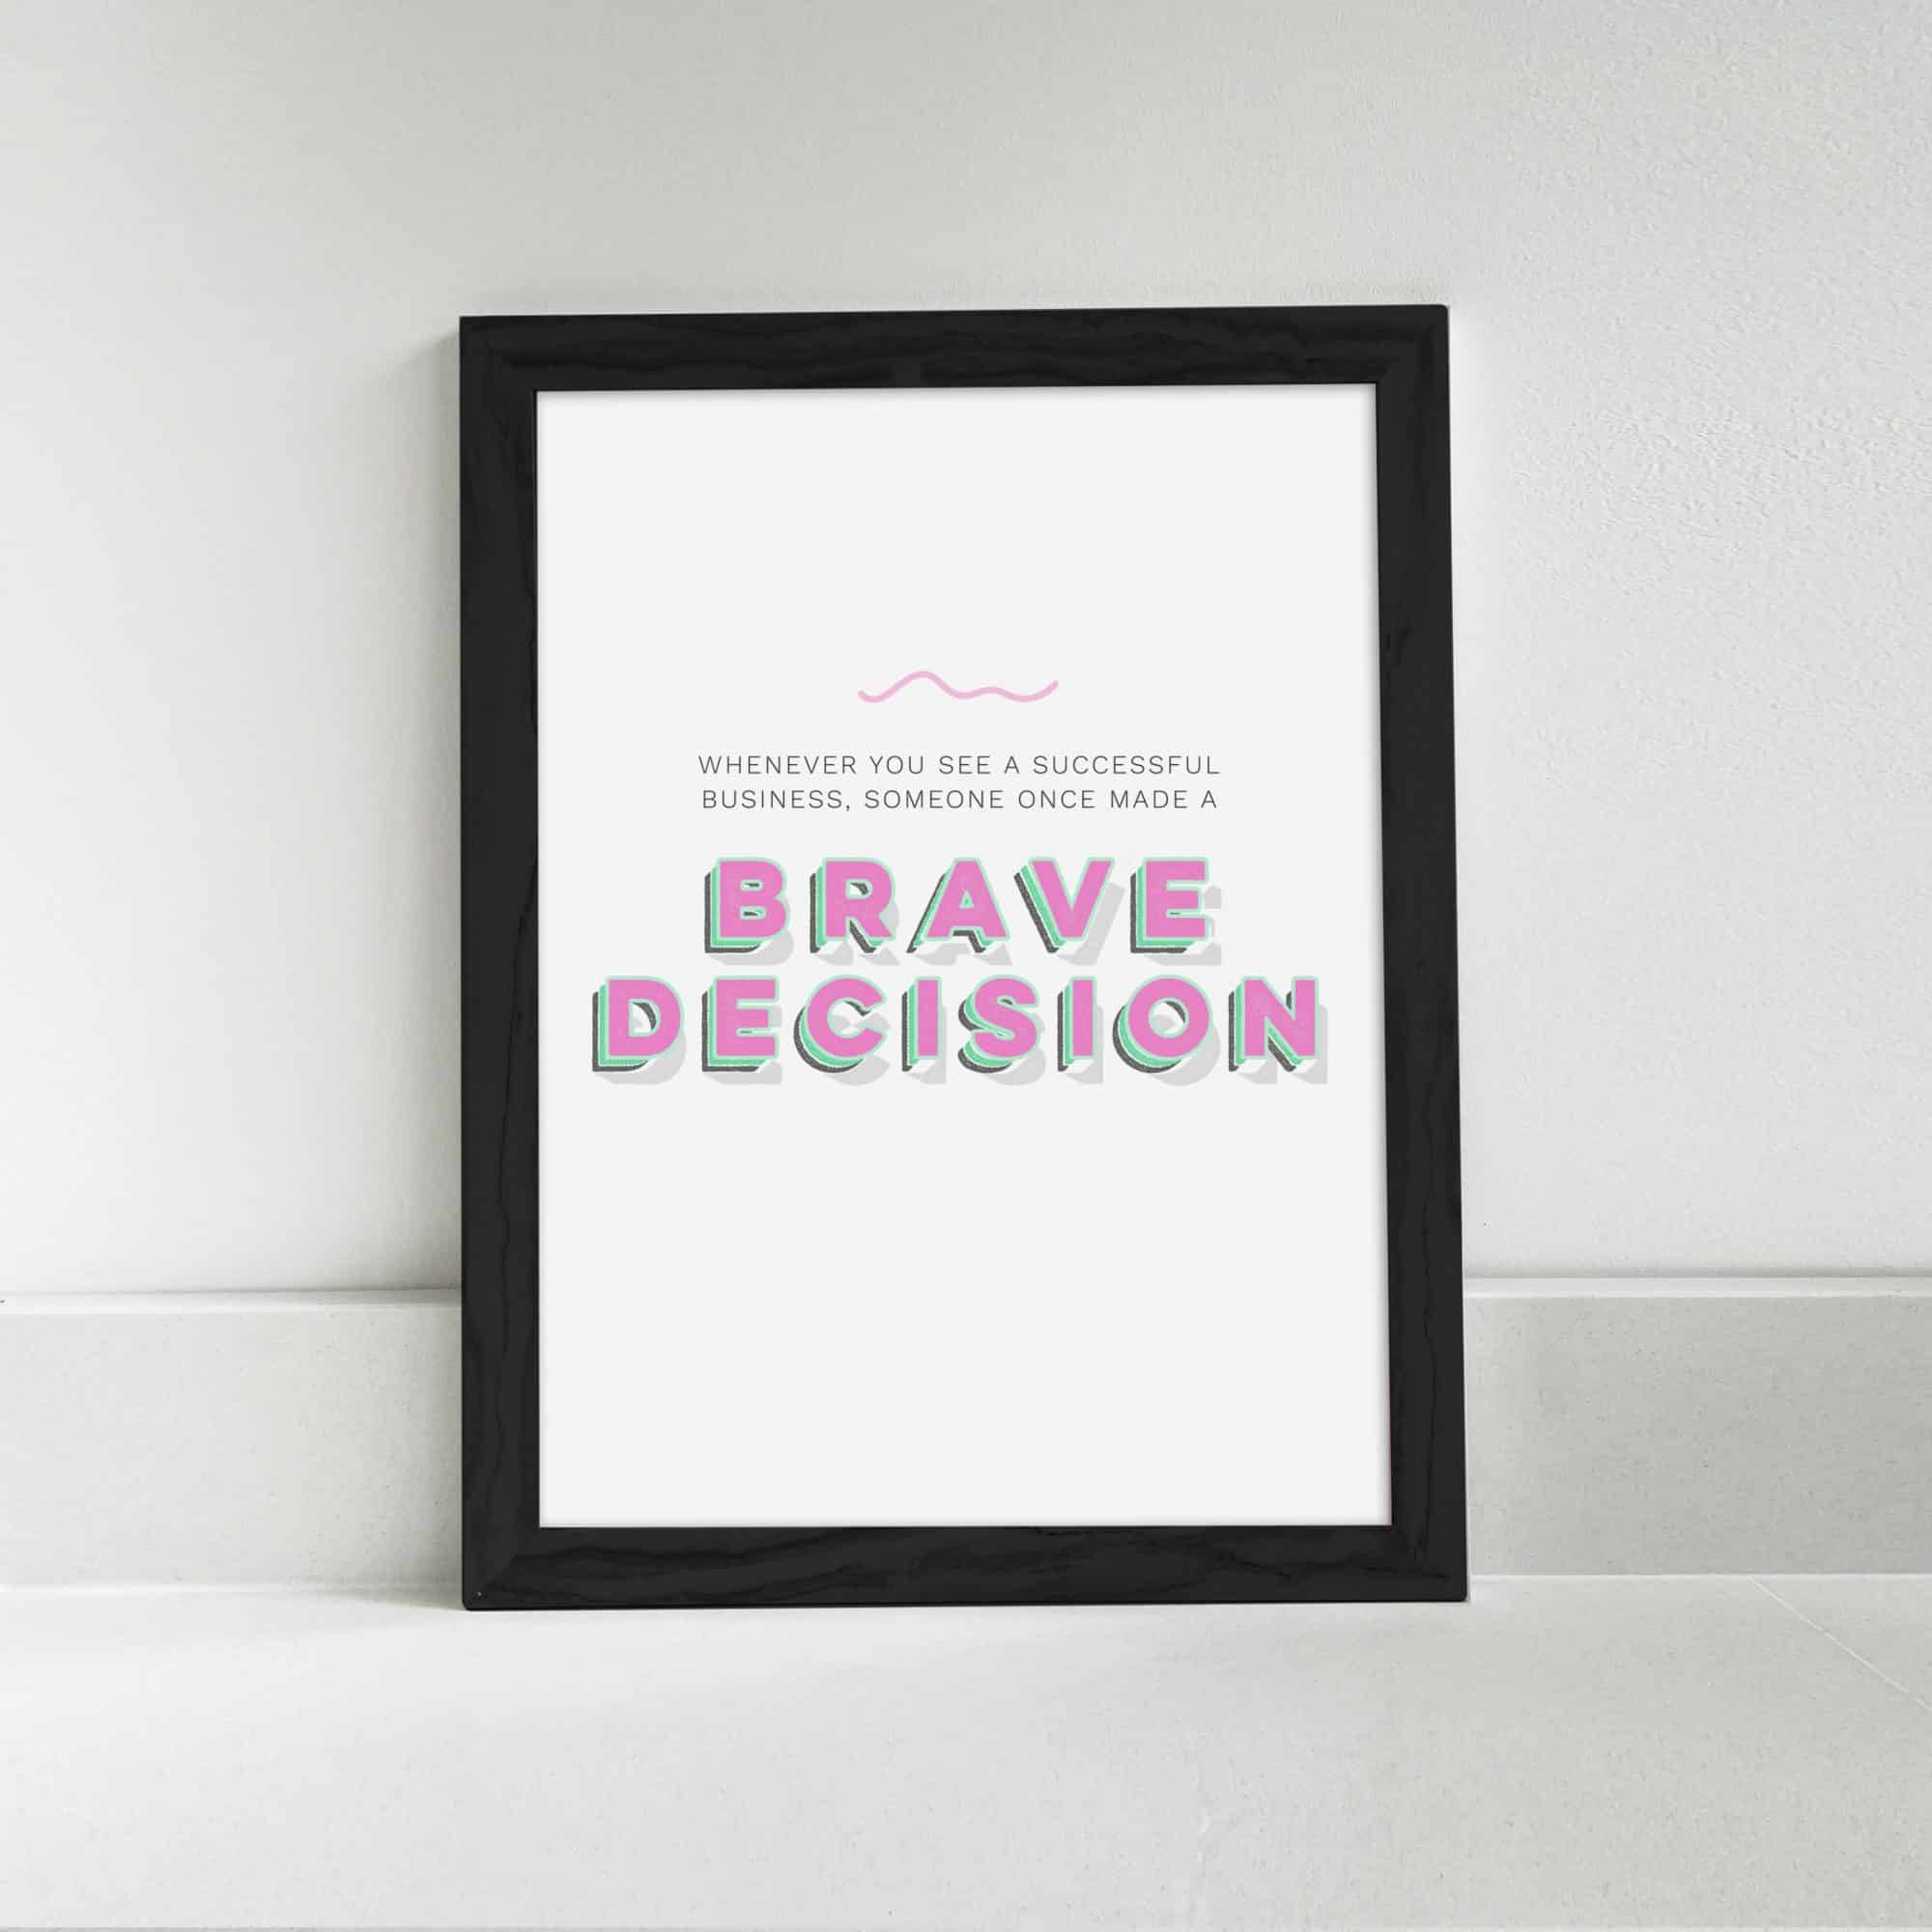 Whenever you see a successful business, someone once made a brave decision